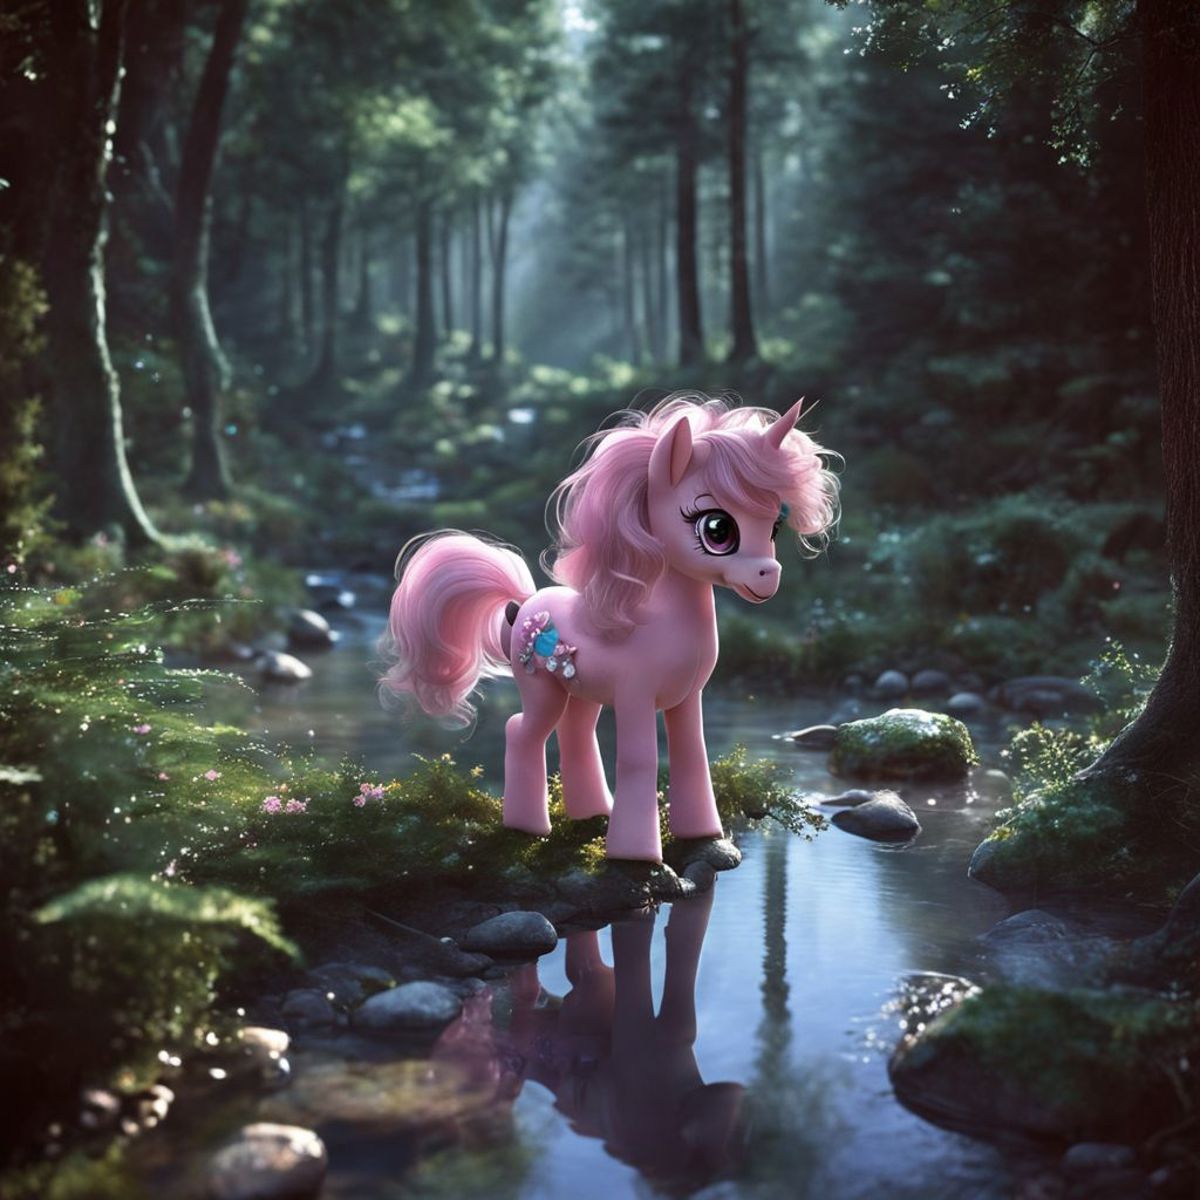 MLPIRL - Ponies, unicorns and weird horses image by norod78